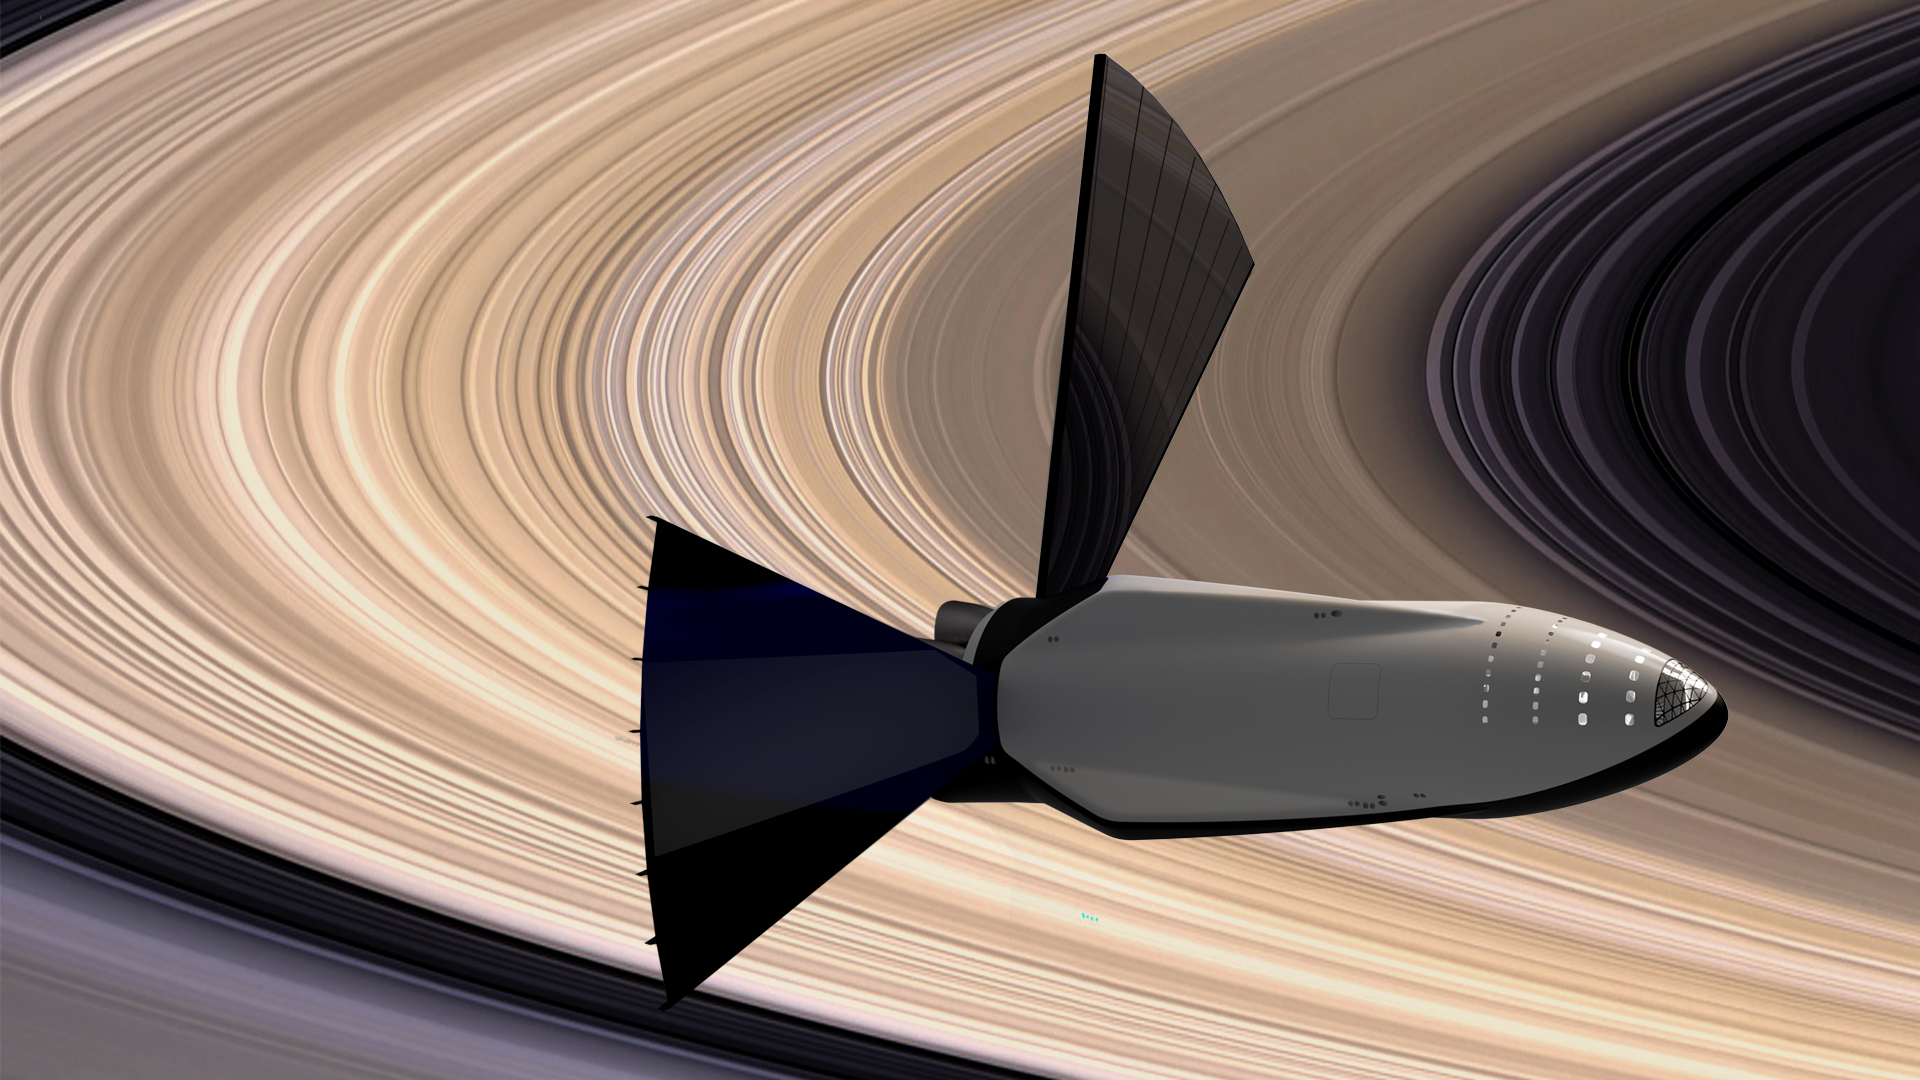 Source: SpaceX (2016, September 25). SpaceX's proposed Interplanetary Spaceship, at Saturn.. wikimedia commons. https://commons.wikimedia.org/w/index.php?curid=51812109